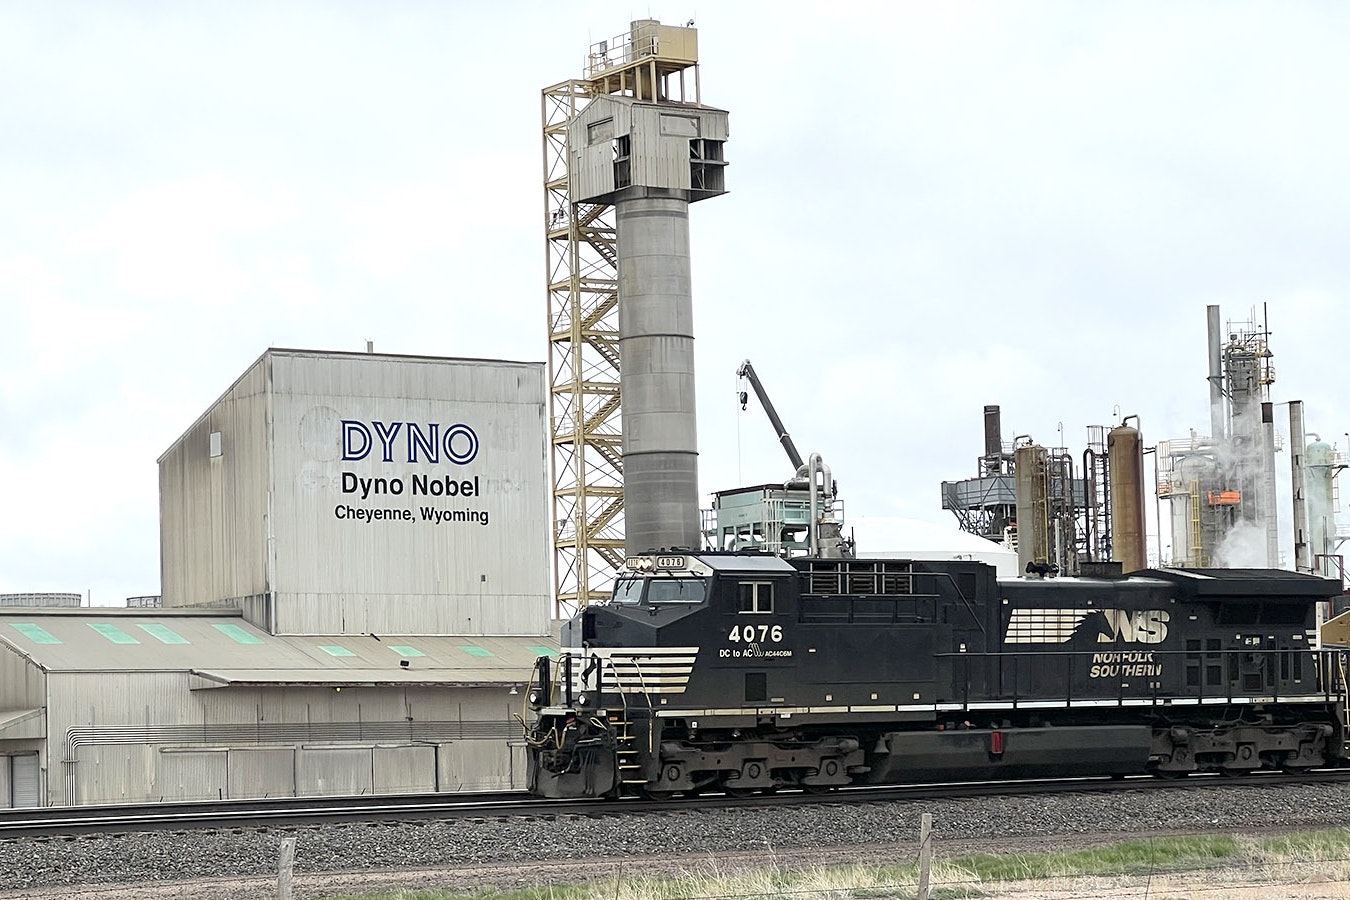 A railcar carrying 60,000 pounds of Dyno Nobel ammonia nitrate, a chemical fertilizer that also can be used to make explosives, left Cheyenne full and arrived two weeks later in California empty.